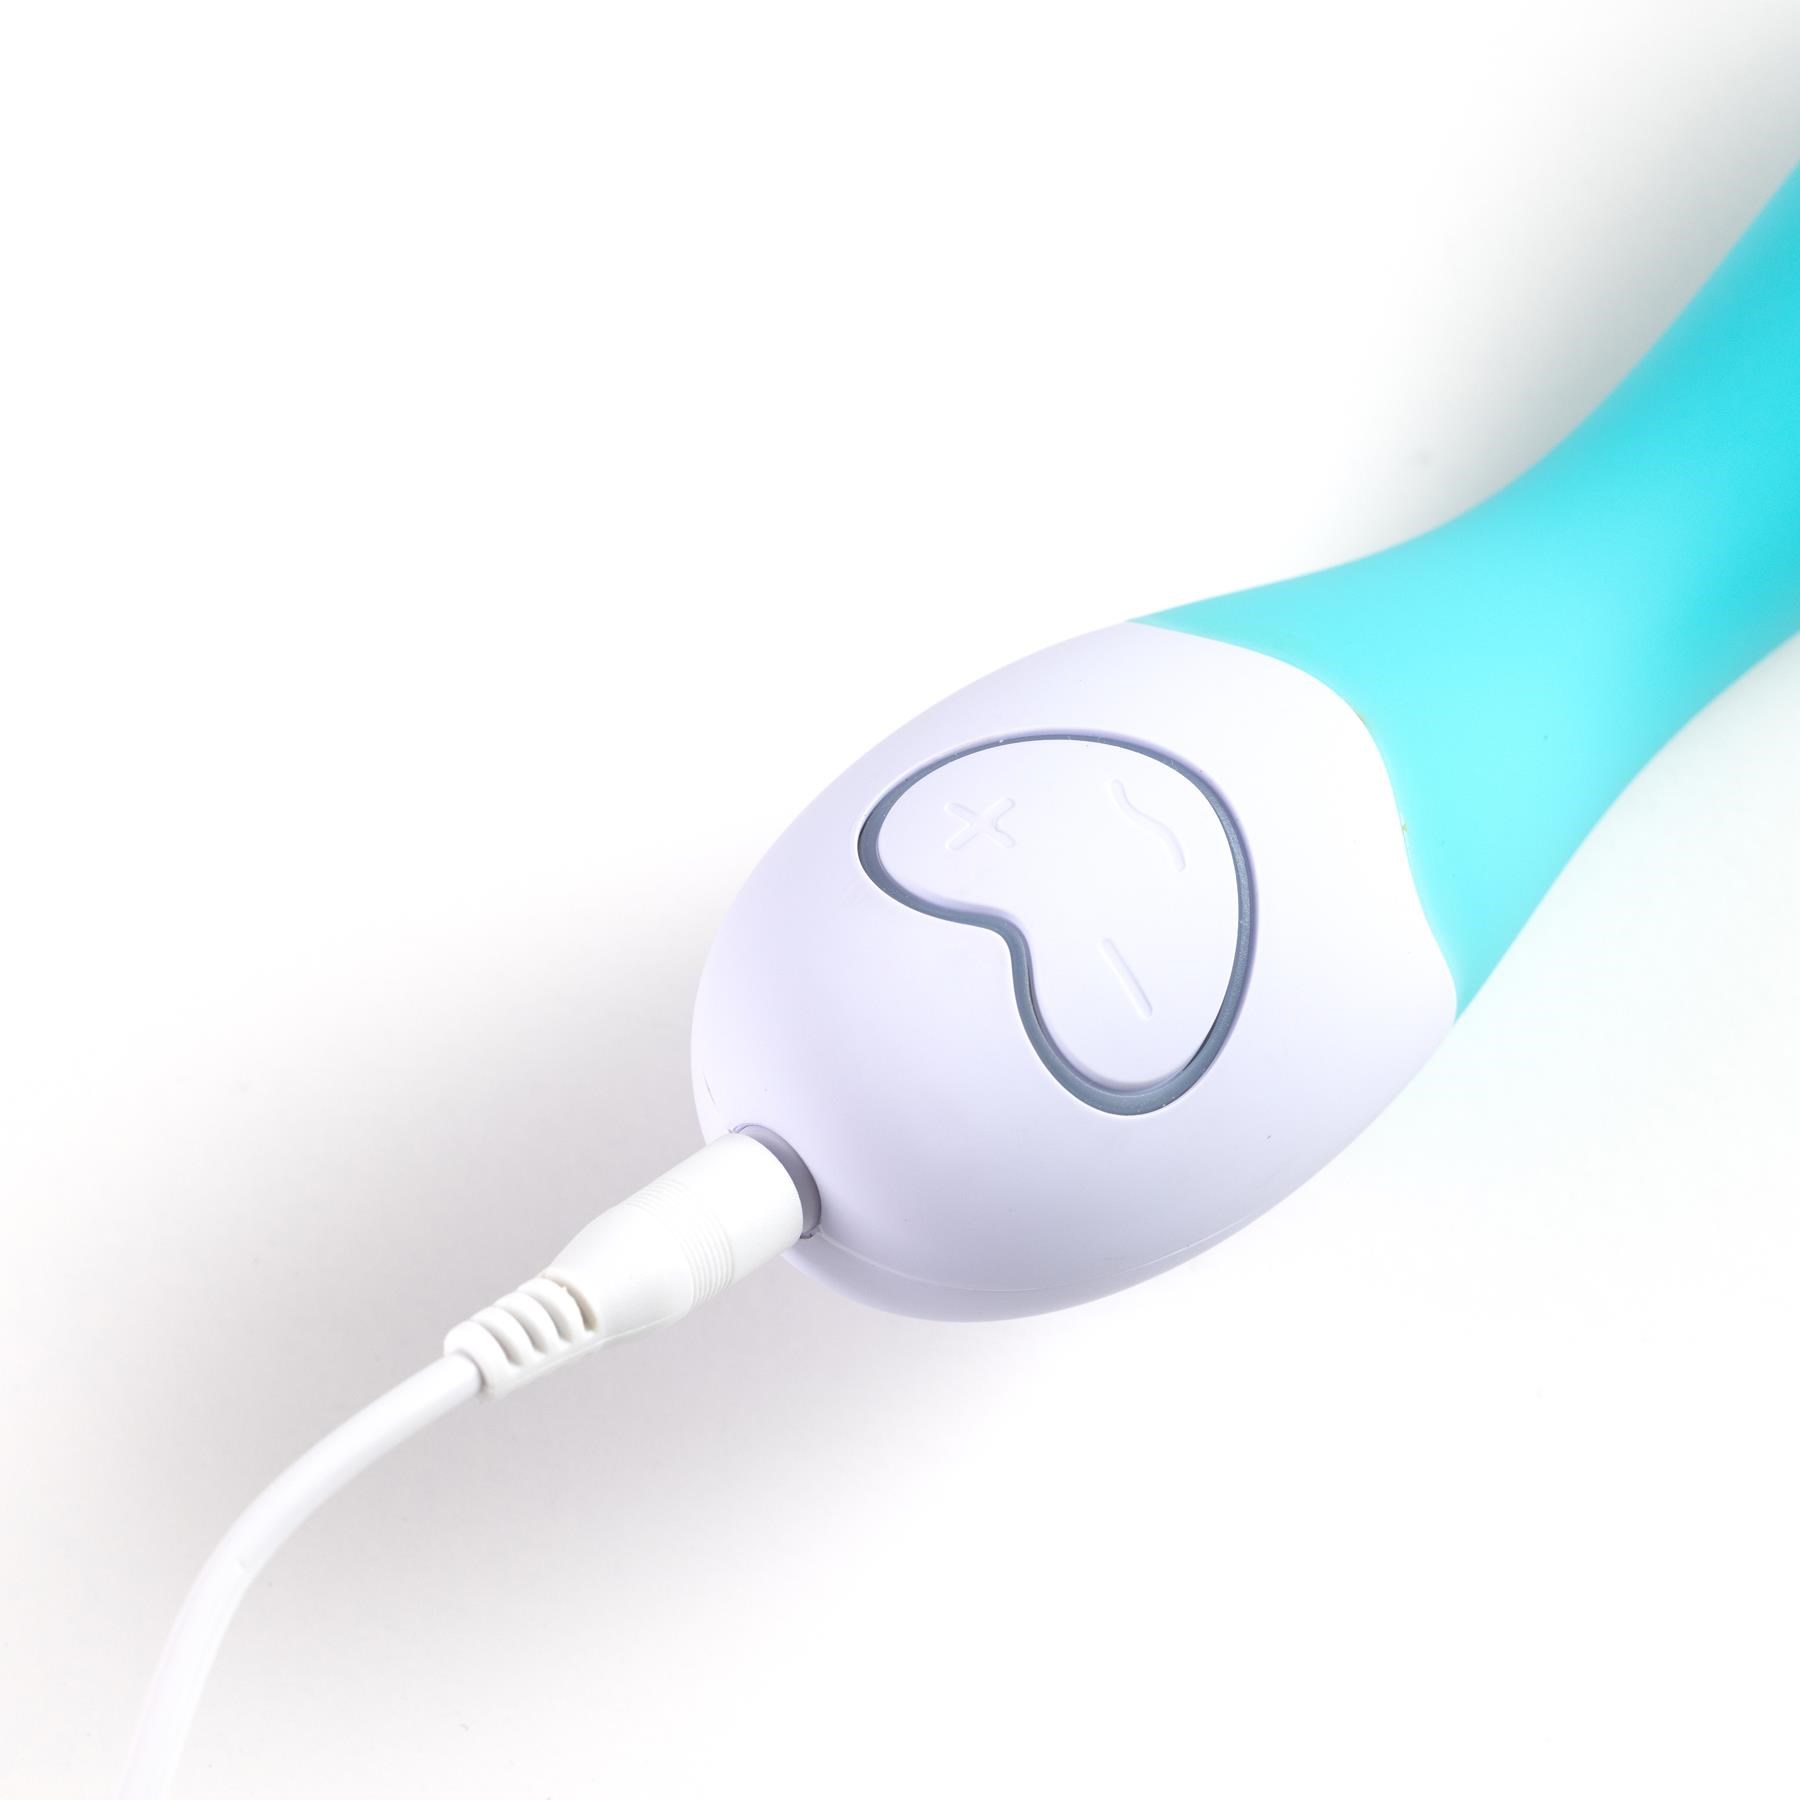 OhMiBod Lovelife Cuddle G-Spot Massager - Showing Where Charger Cable is Placed - Turquoise